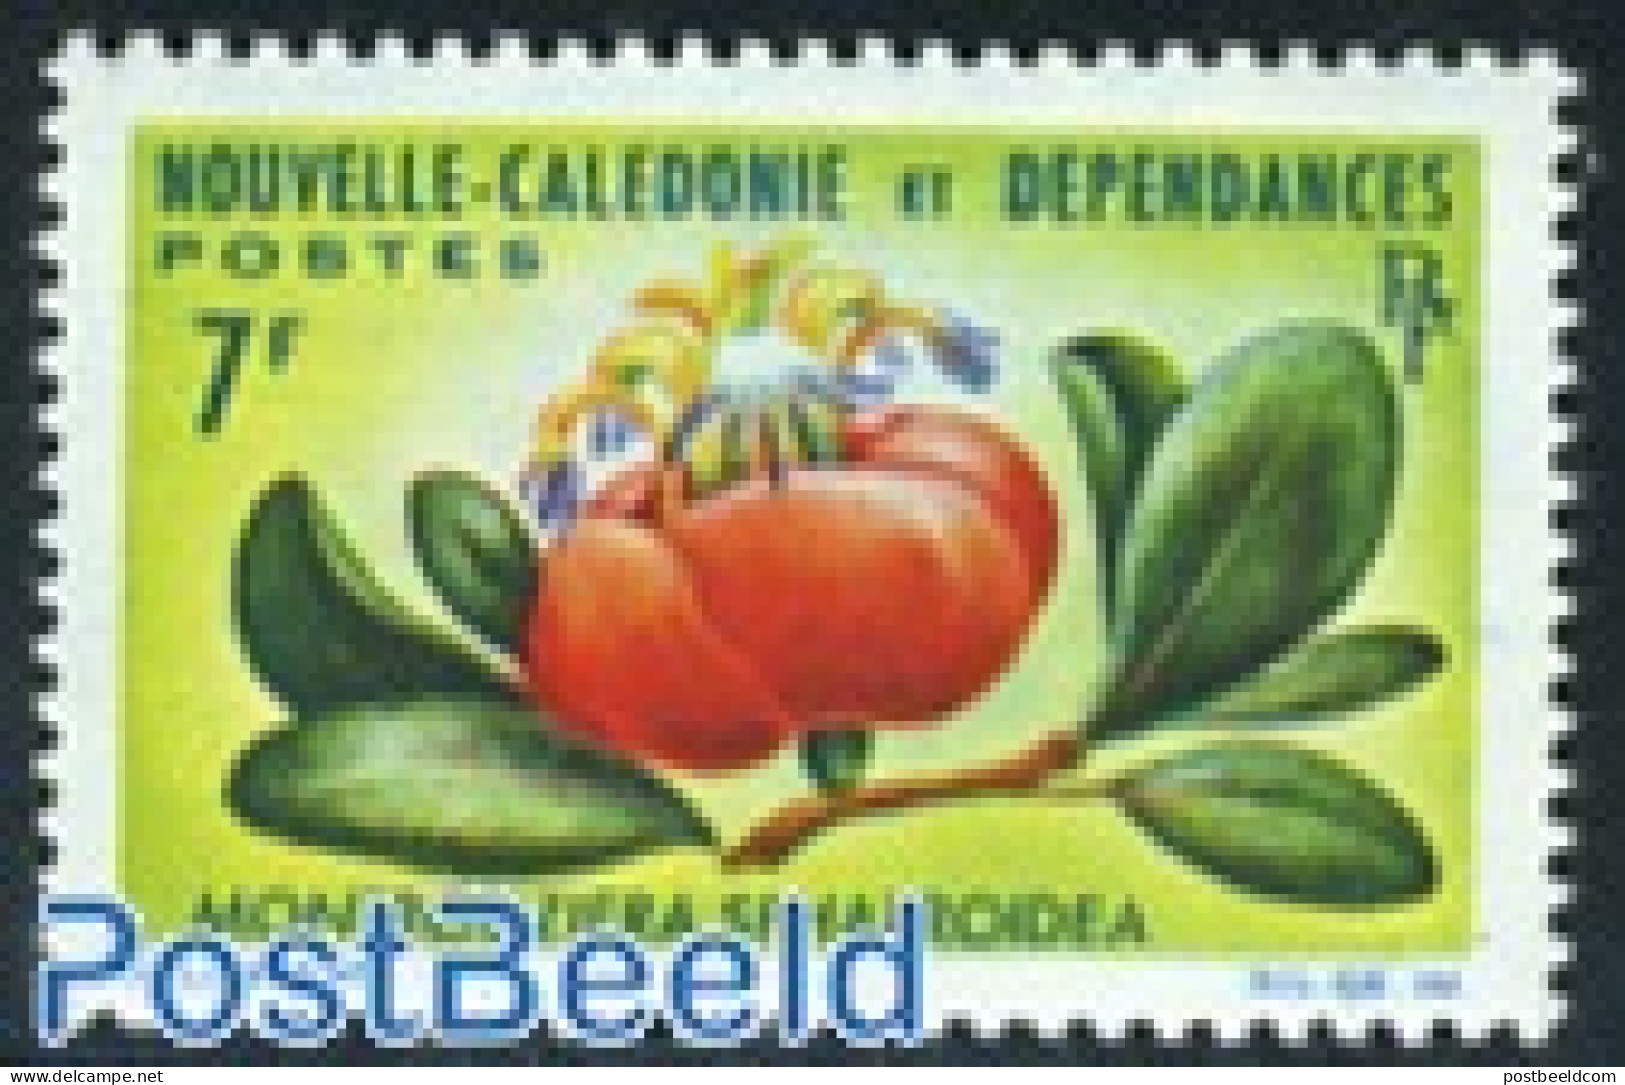 New Caledonia 1965 7F, Stamp Out Of Set, Mint NH, Nature - Flowers & Plants - Nuovi